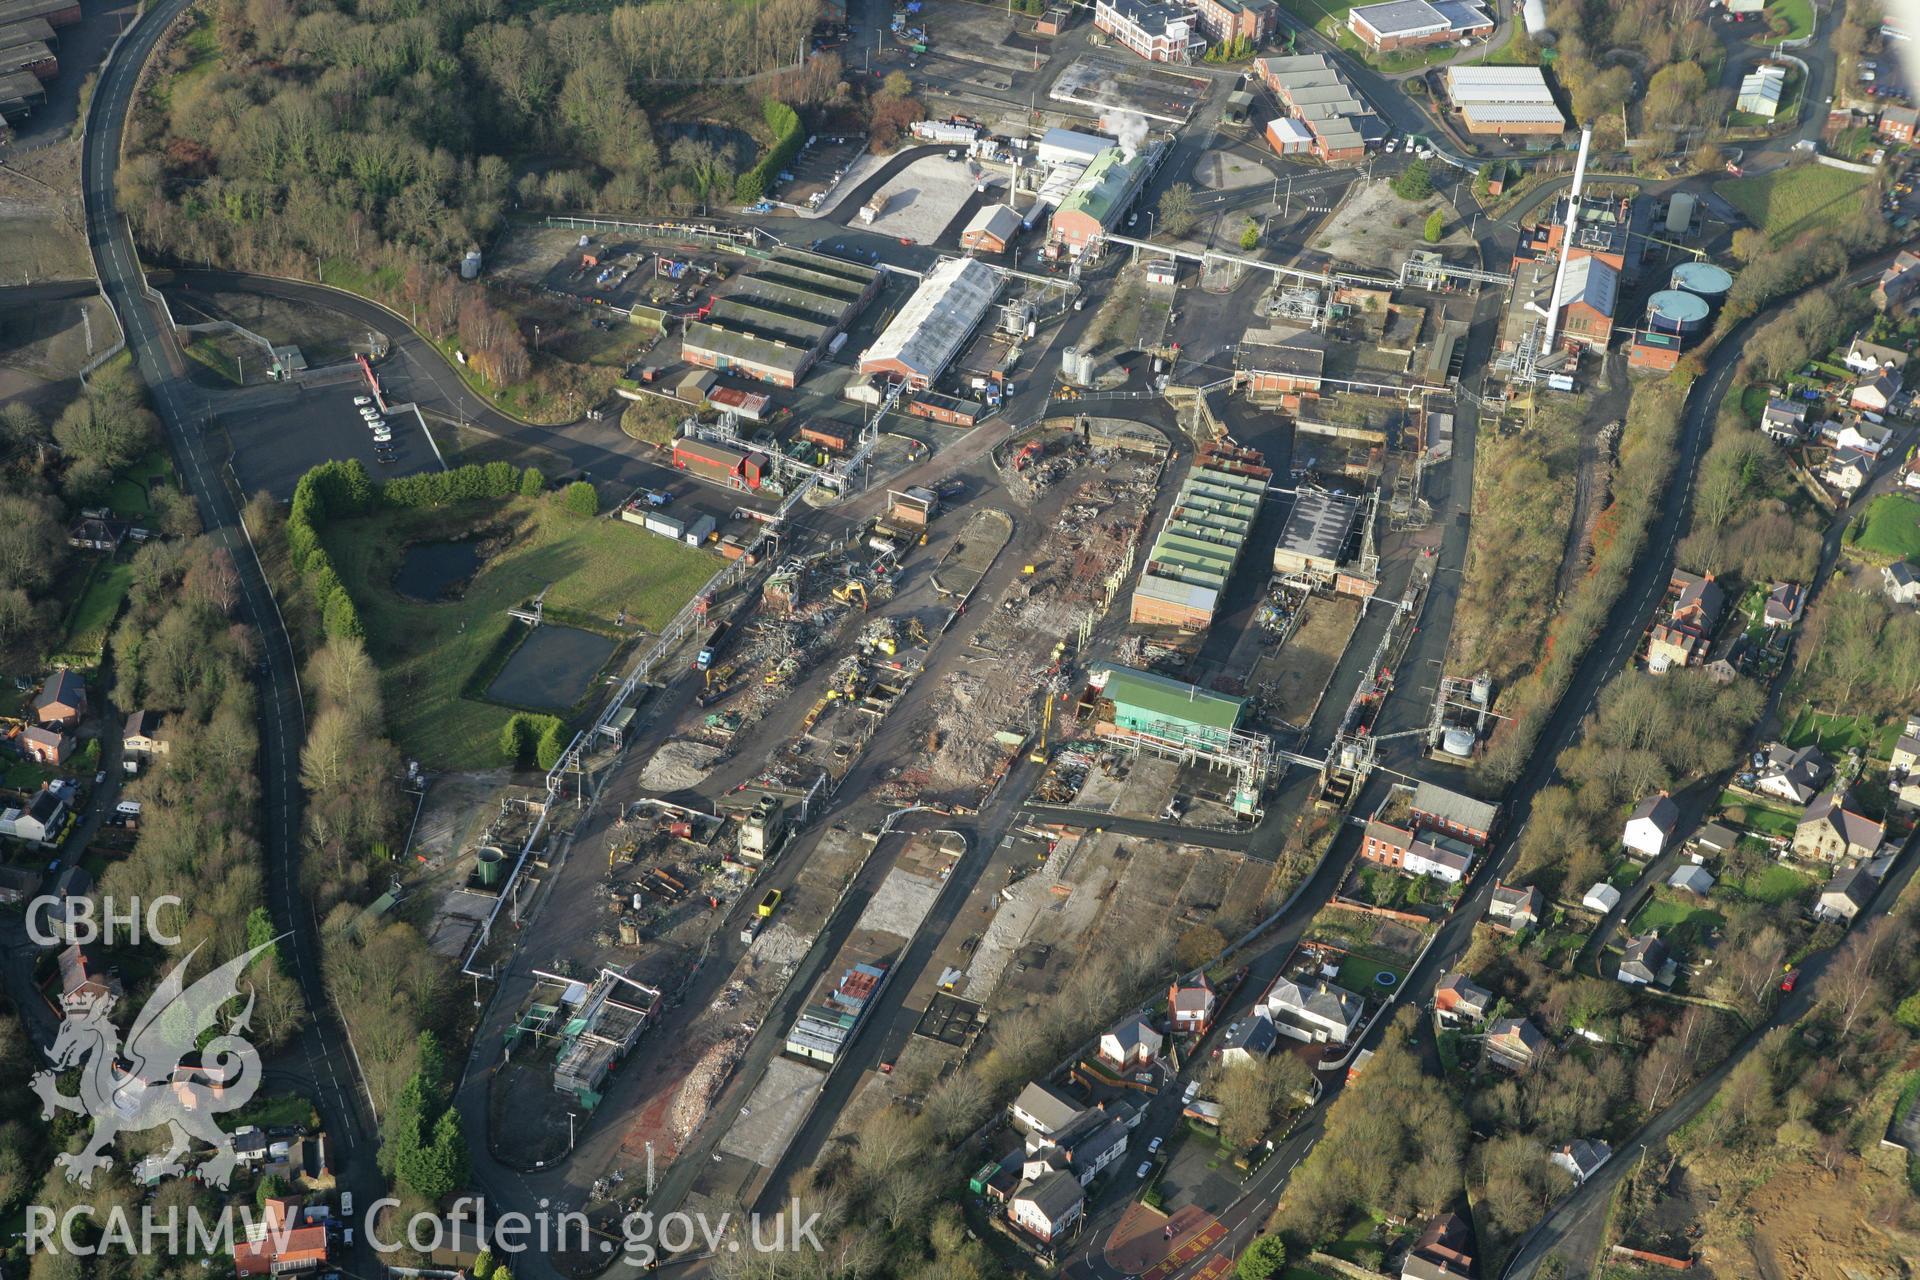 RCAHMW colour oblique aerial photograph of Monsanto Chemical Works, Ruabon, under demolition Taken on 10 December 2009 by Toby Driver